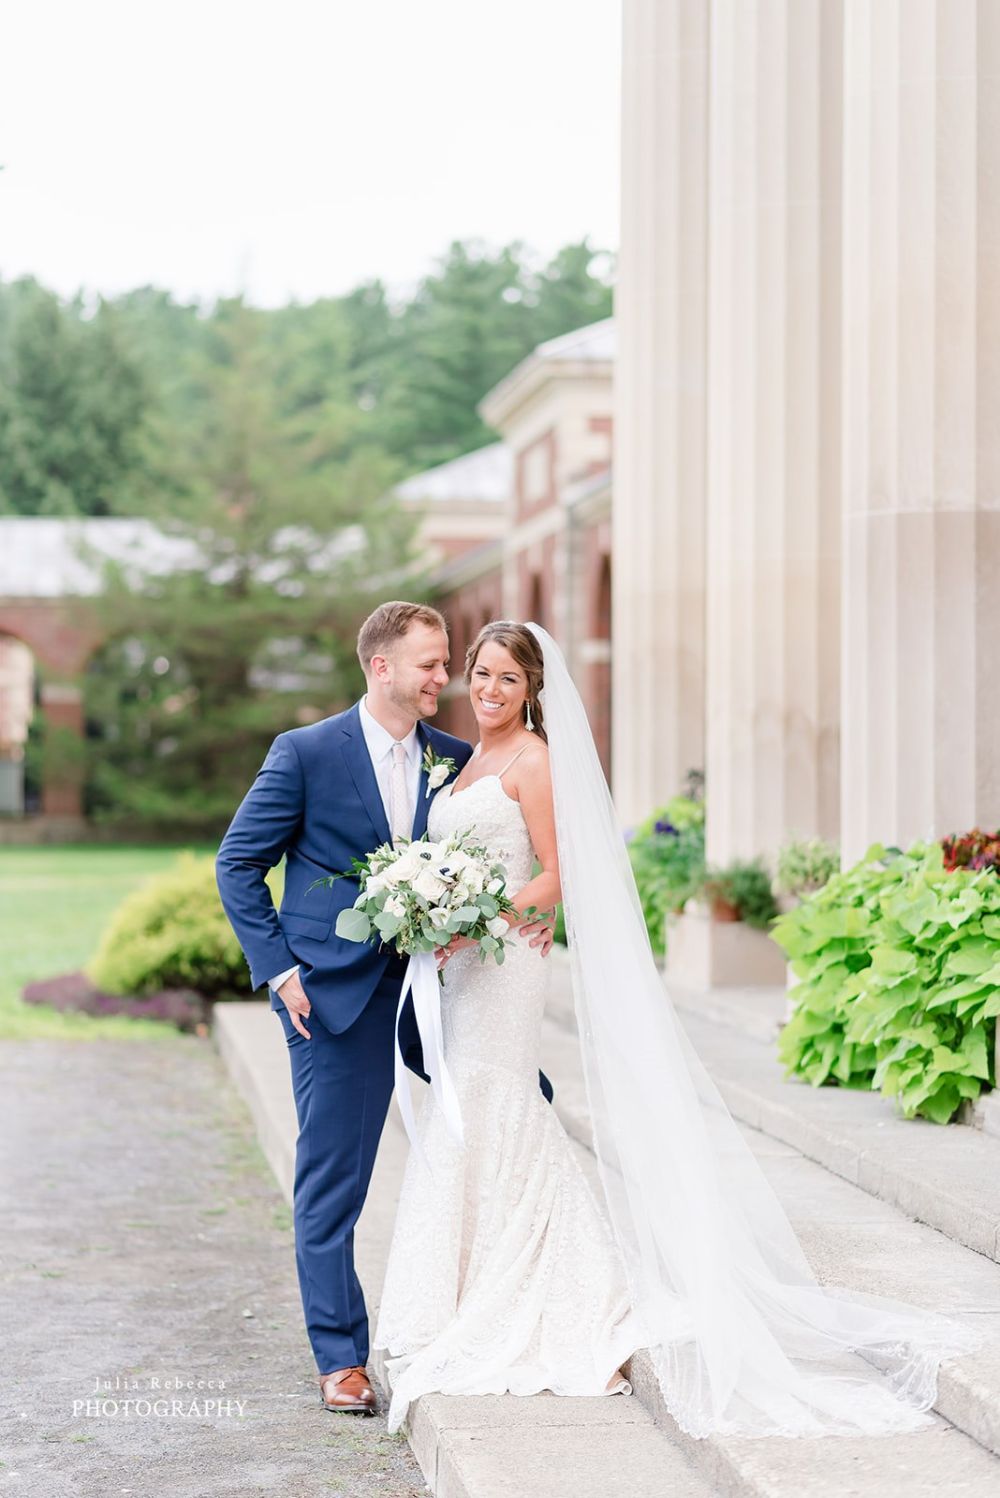 A Chic and Classic Blush Wedding In New York